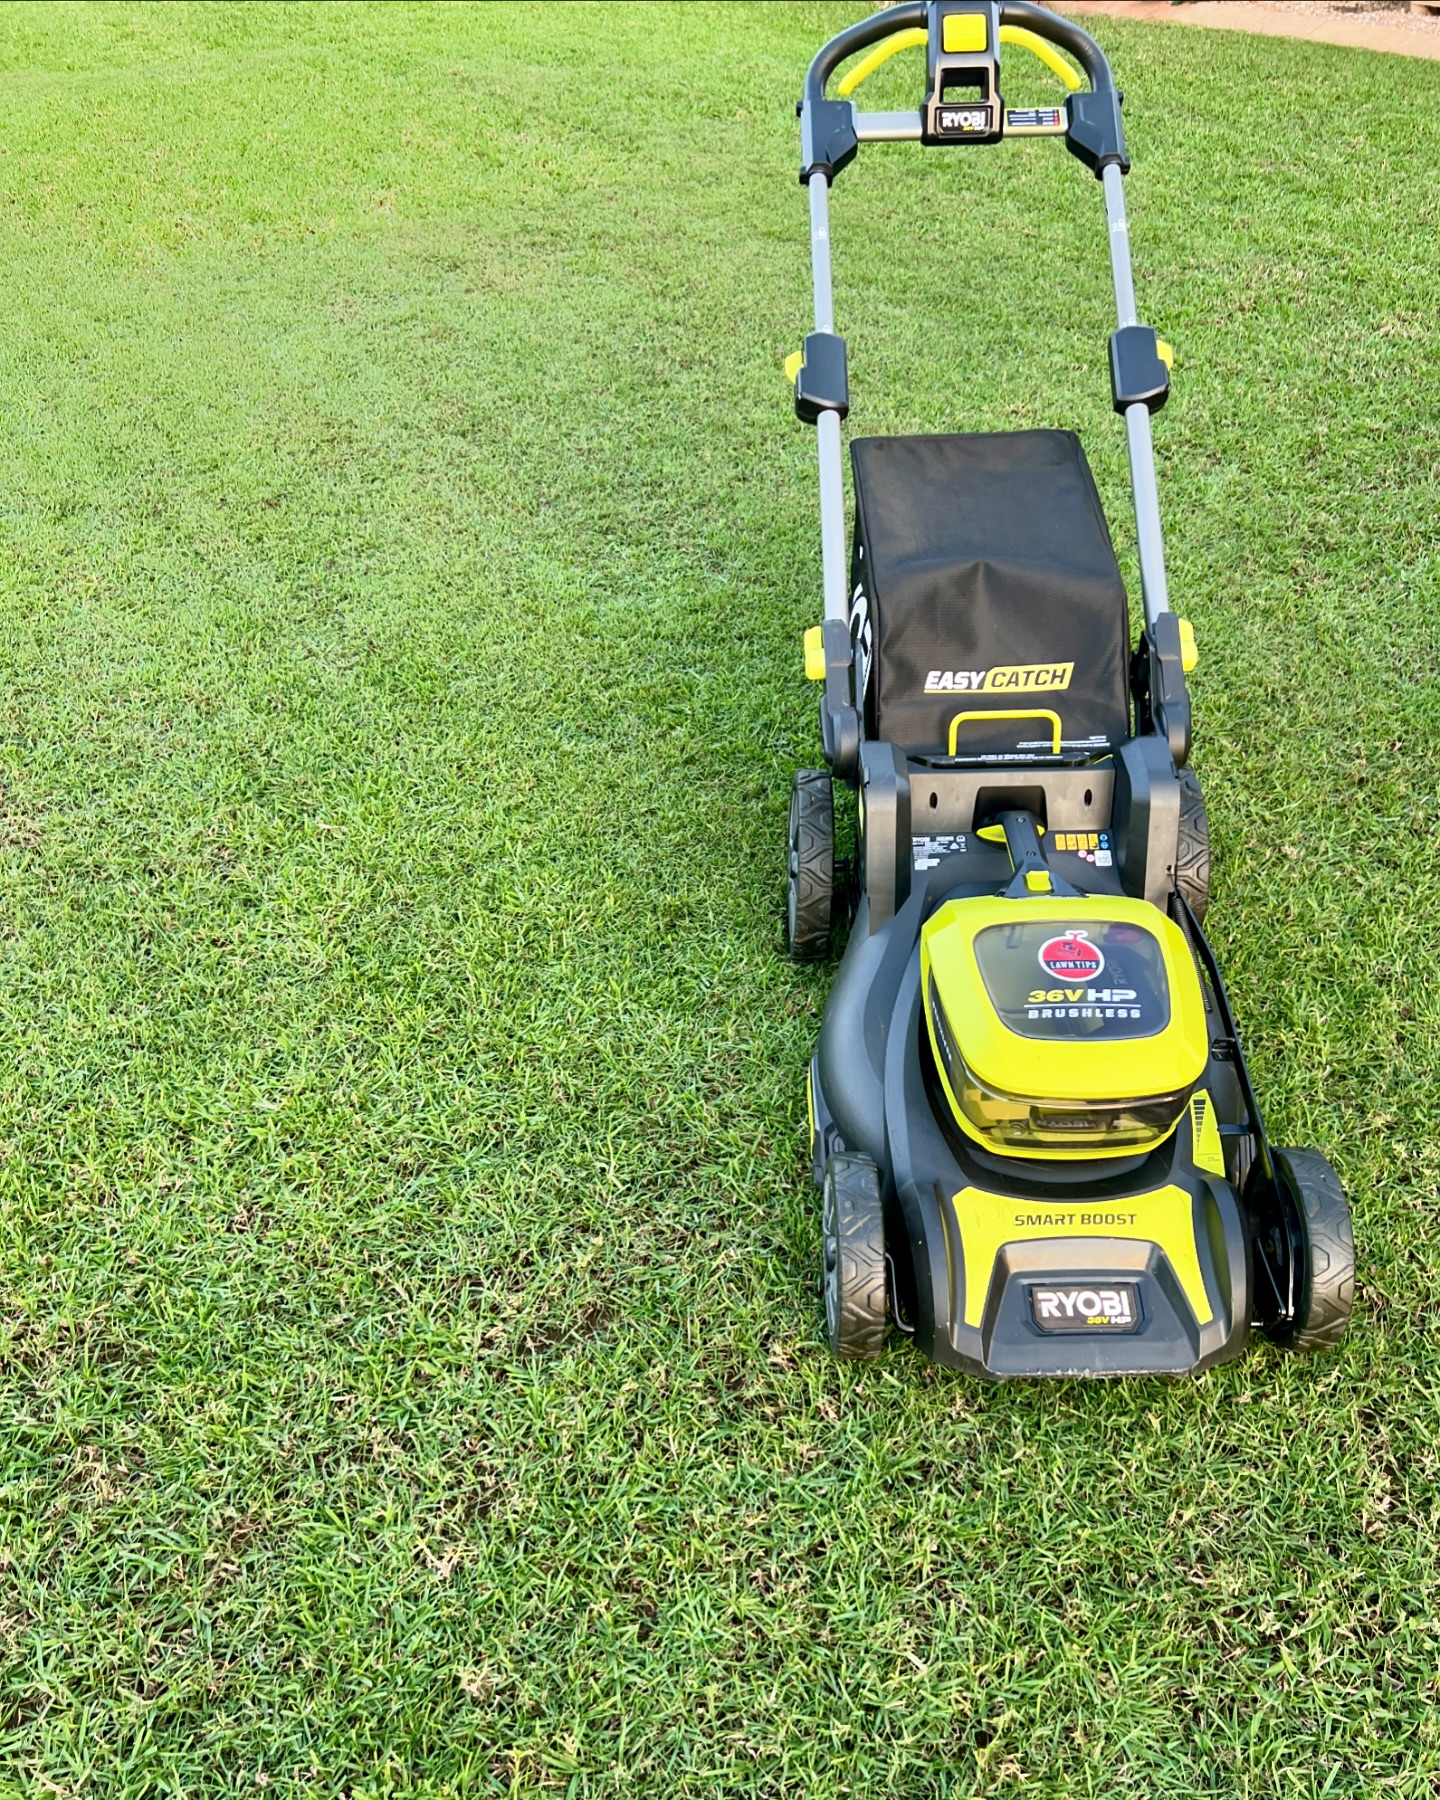 I snuck in a late afternoon mow with the ryobiau 36v Brushless Mower. The lawn is bouncing back after an end of season de-thatch and a reset on the height of cut. Next on the to do list is to add Pre-Emergent and wetting agent to the lawn.